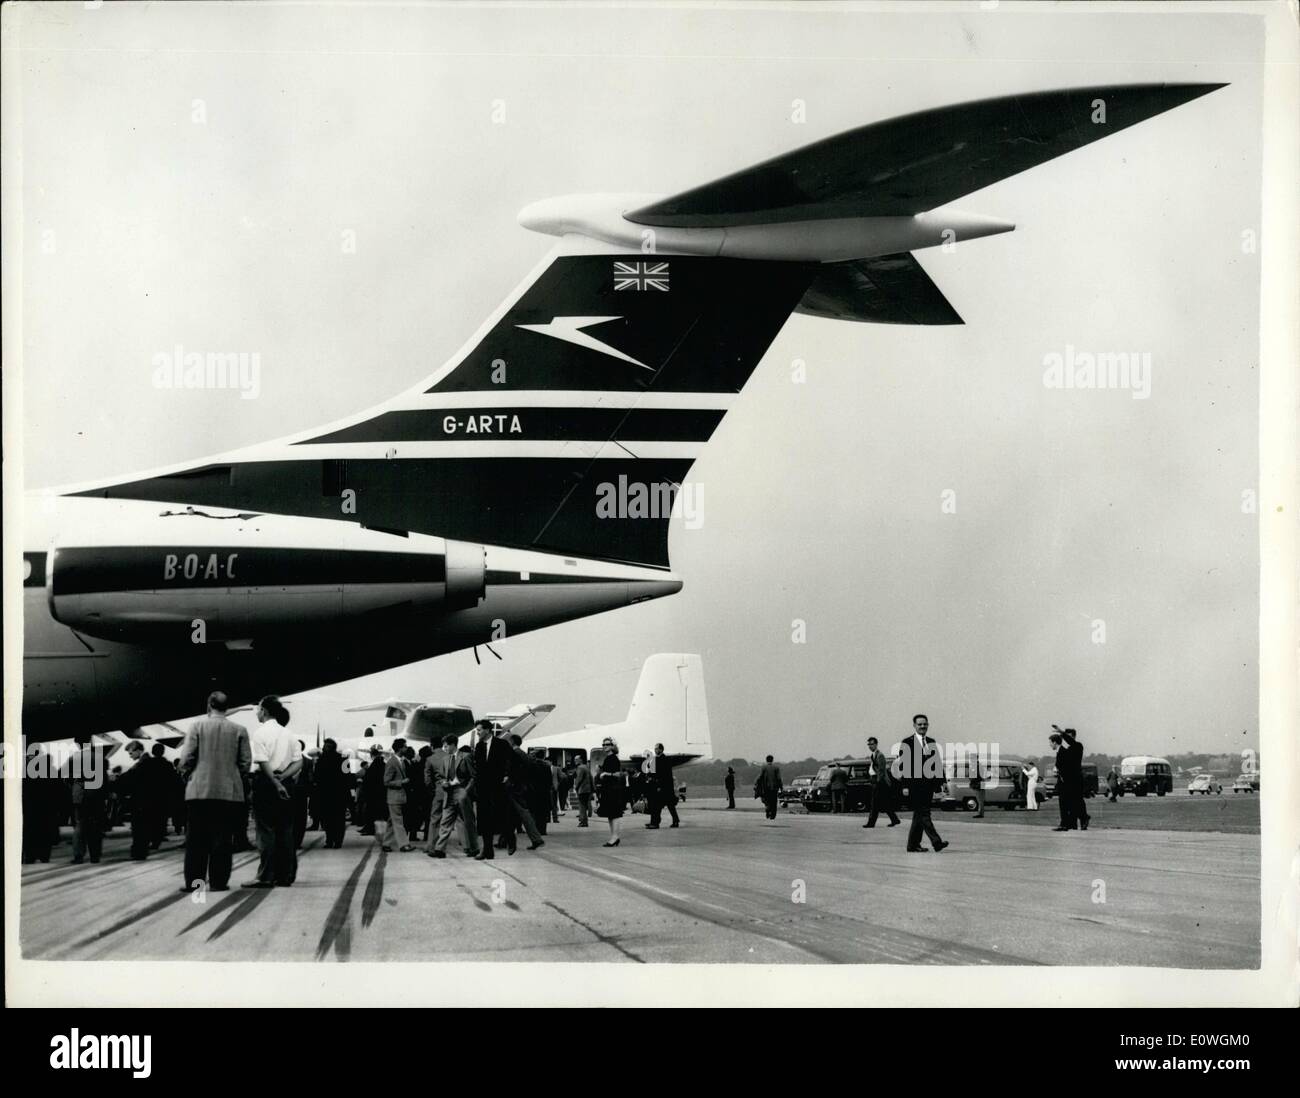 Sep. 09, 1962 - Preview Of The Annual Farnborough Air Show Today. Photo shows The tail section of one of the new VC-10 aircrafts on show at the preview today. The VC-10, powered by four Rolls Royce Conway R.Co. 42 engines, is claimed to be the world's most powerful big jet airliner. Stock Photo